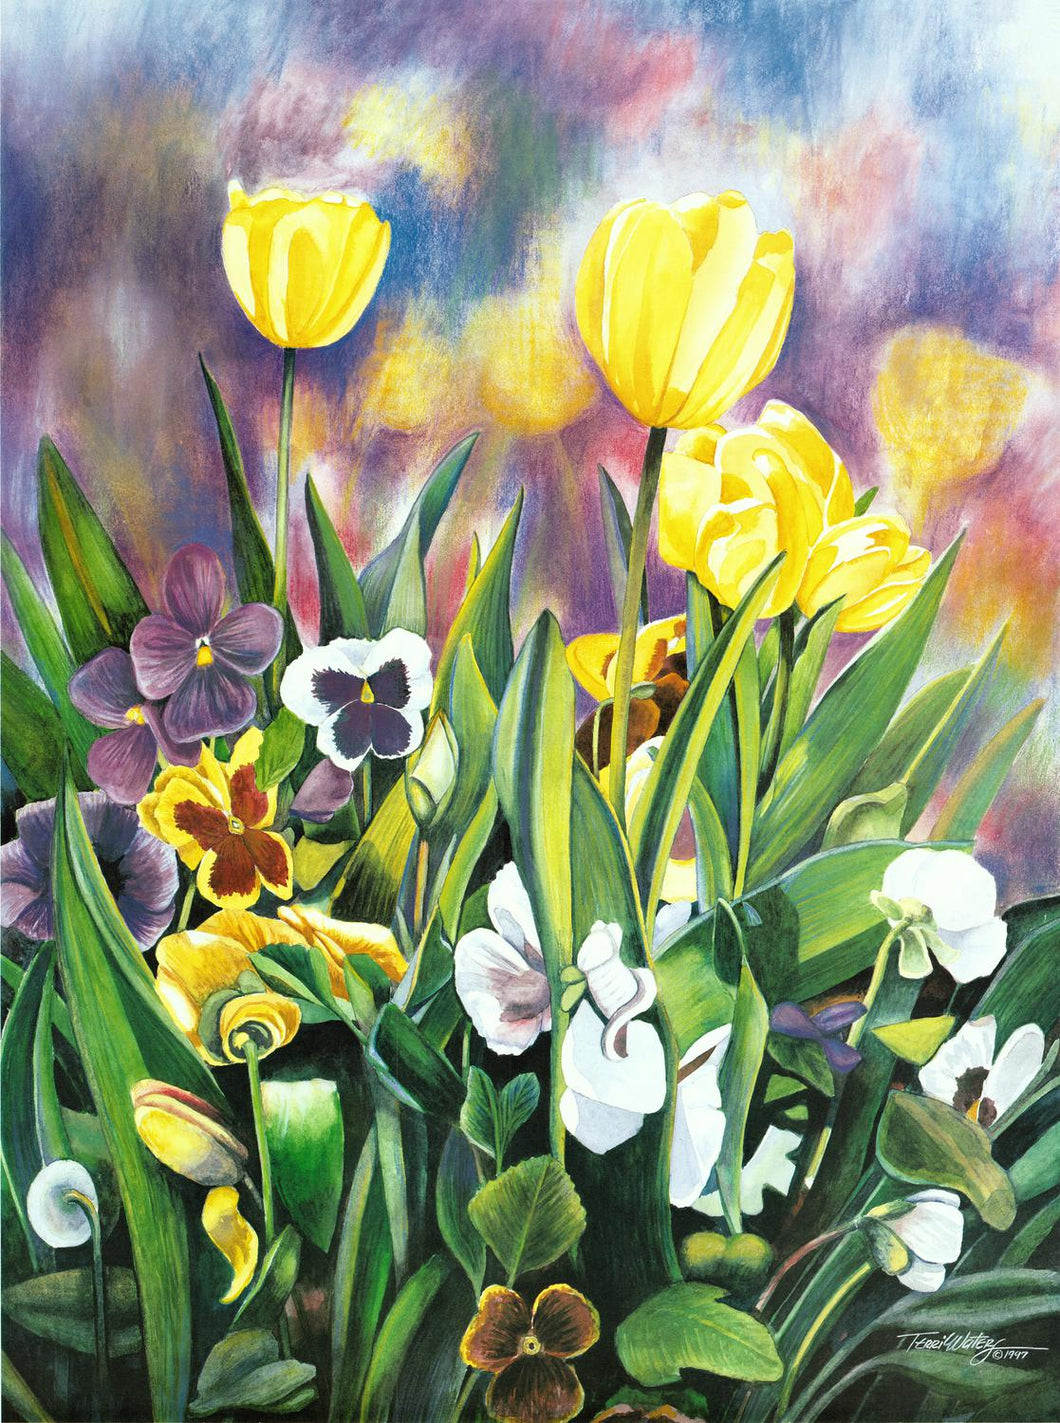 A Gatlinburg floral offering, done in watercolor, with a riot of spring flowers.